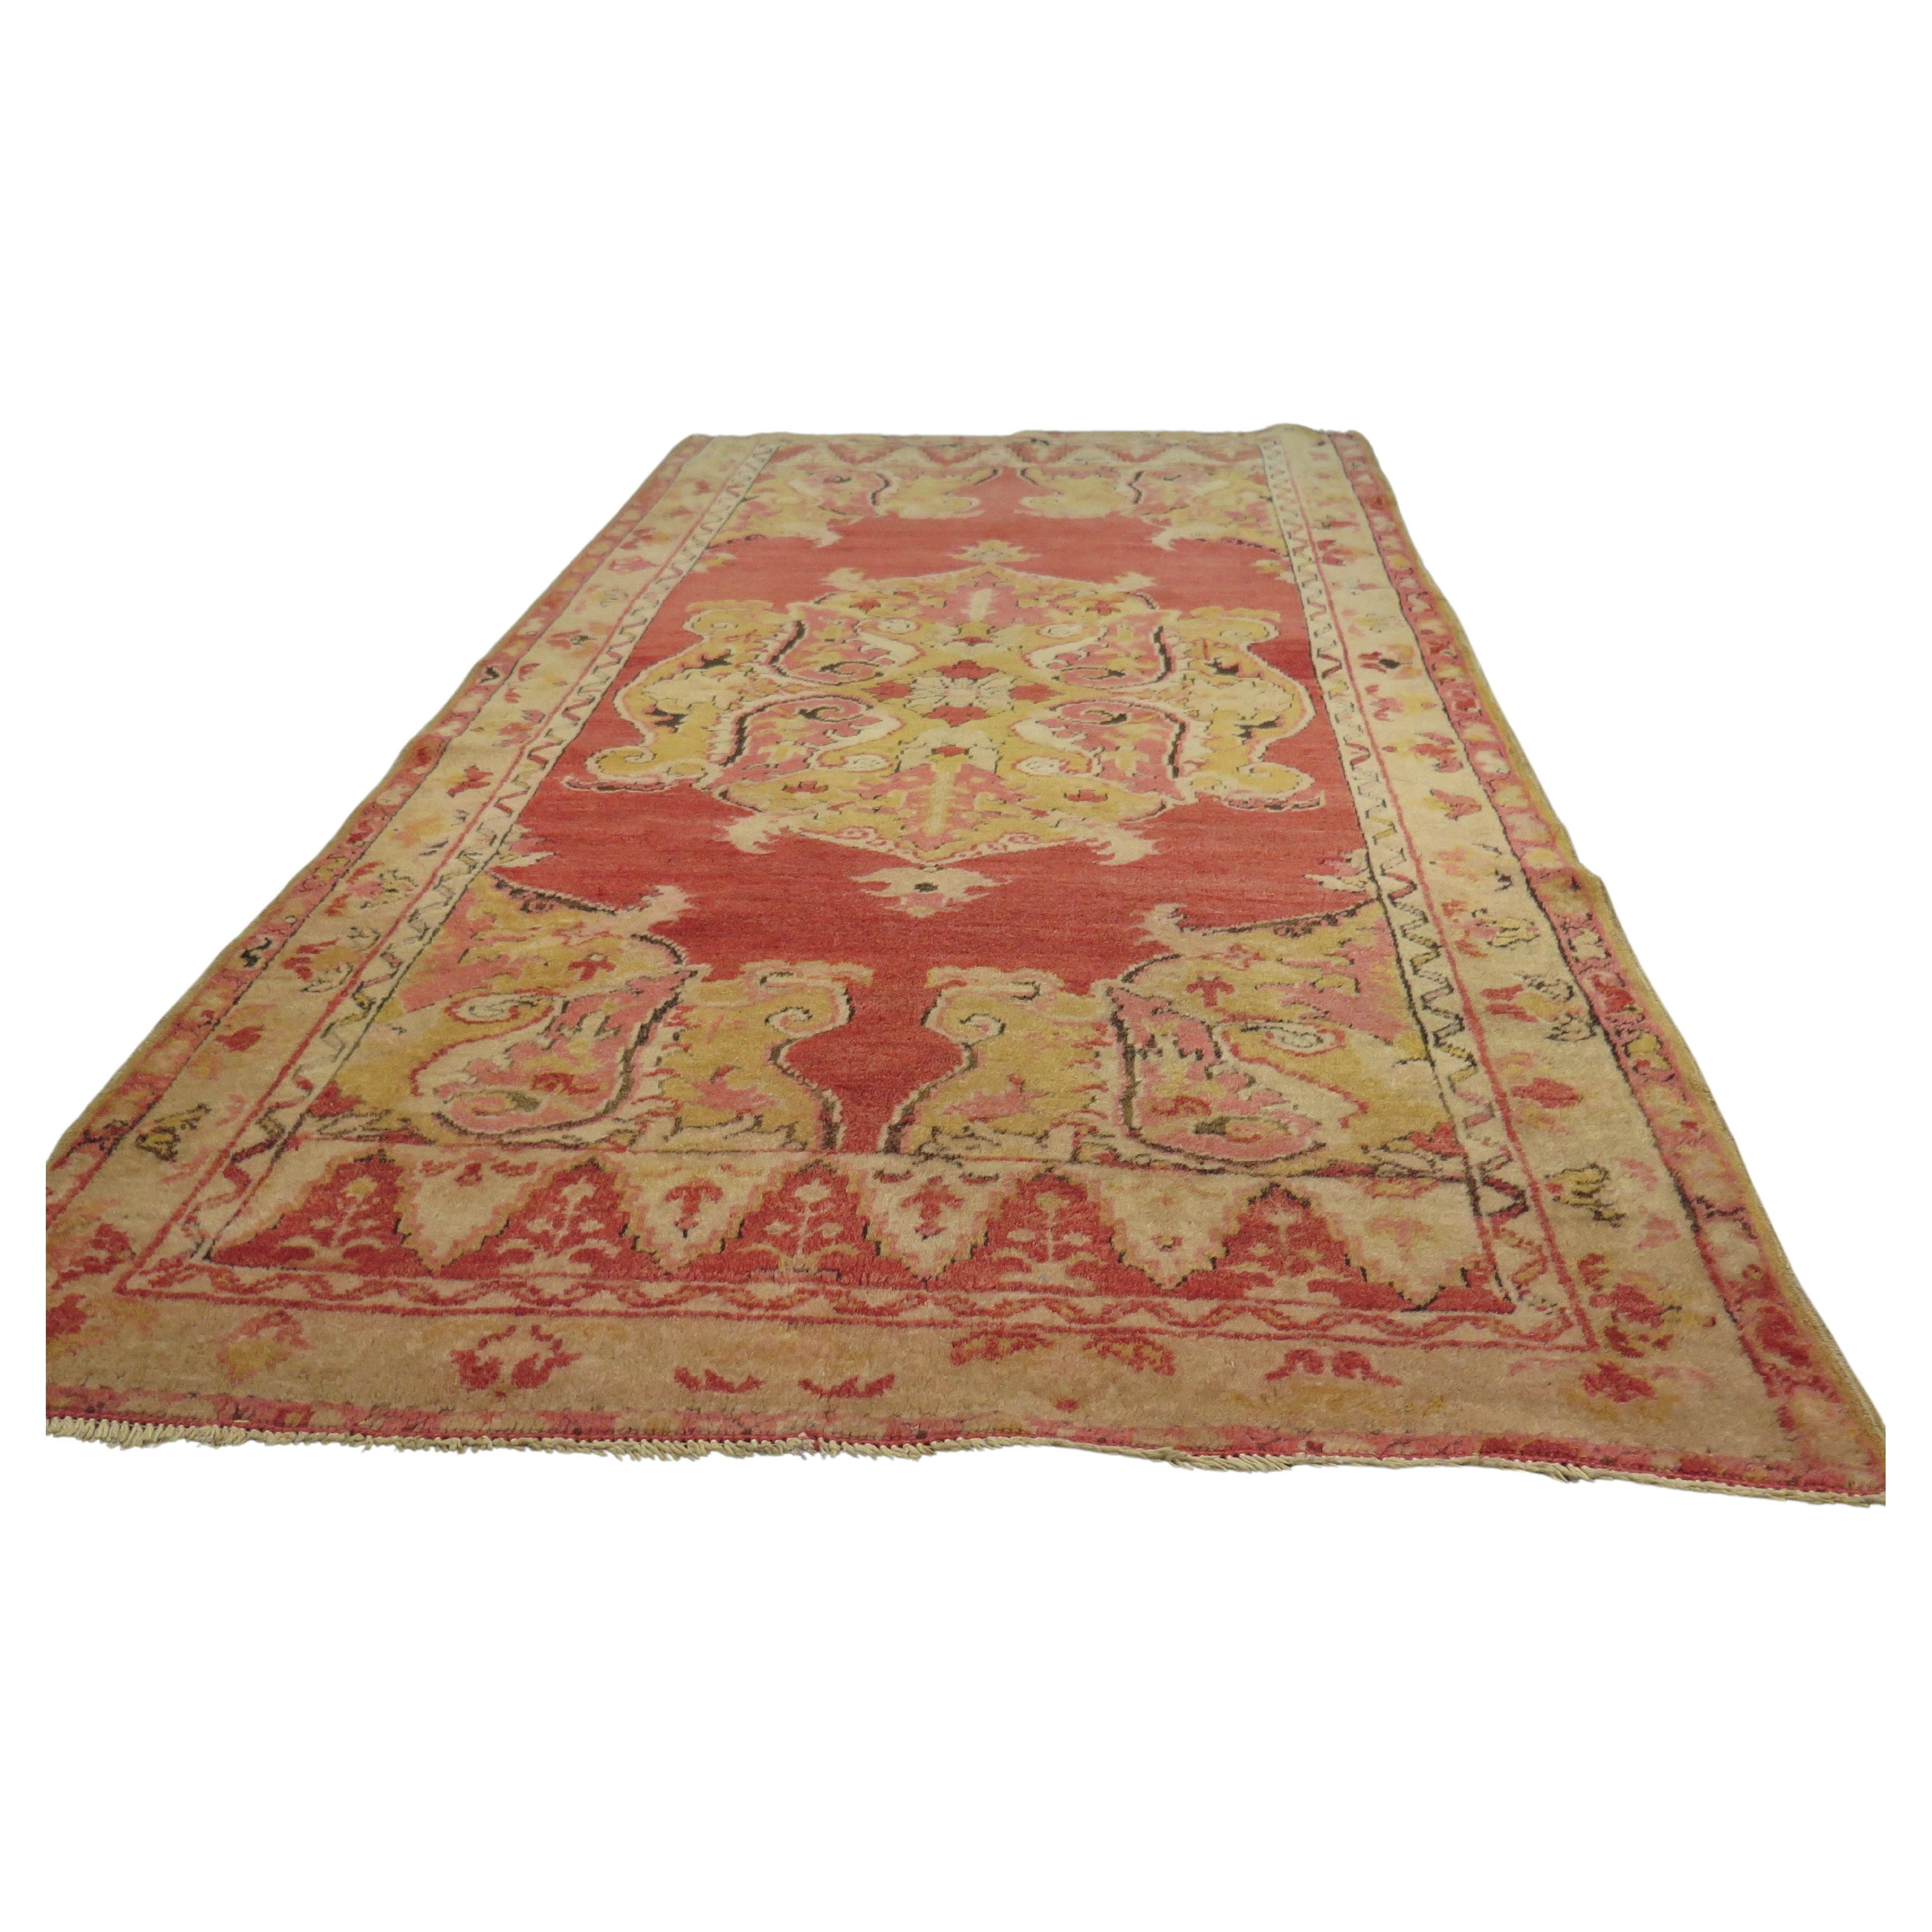 19th Century Oushak Accent Rug